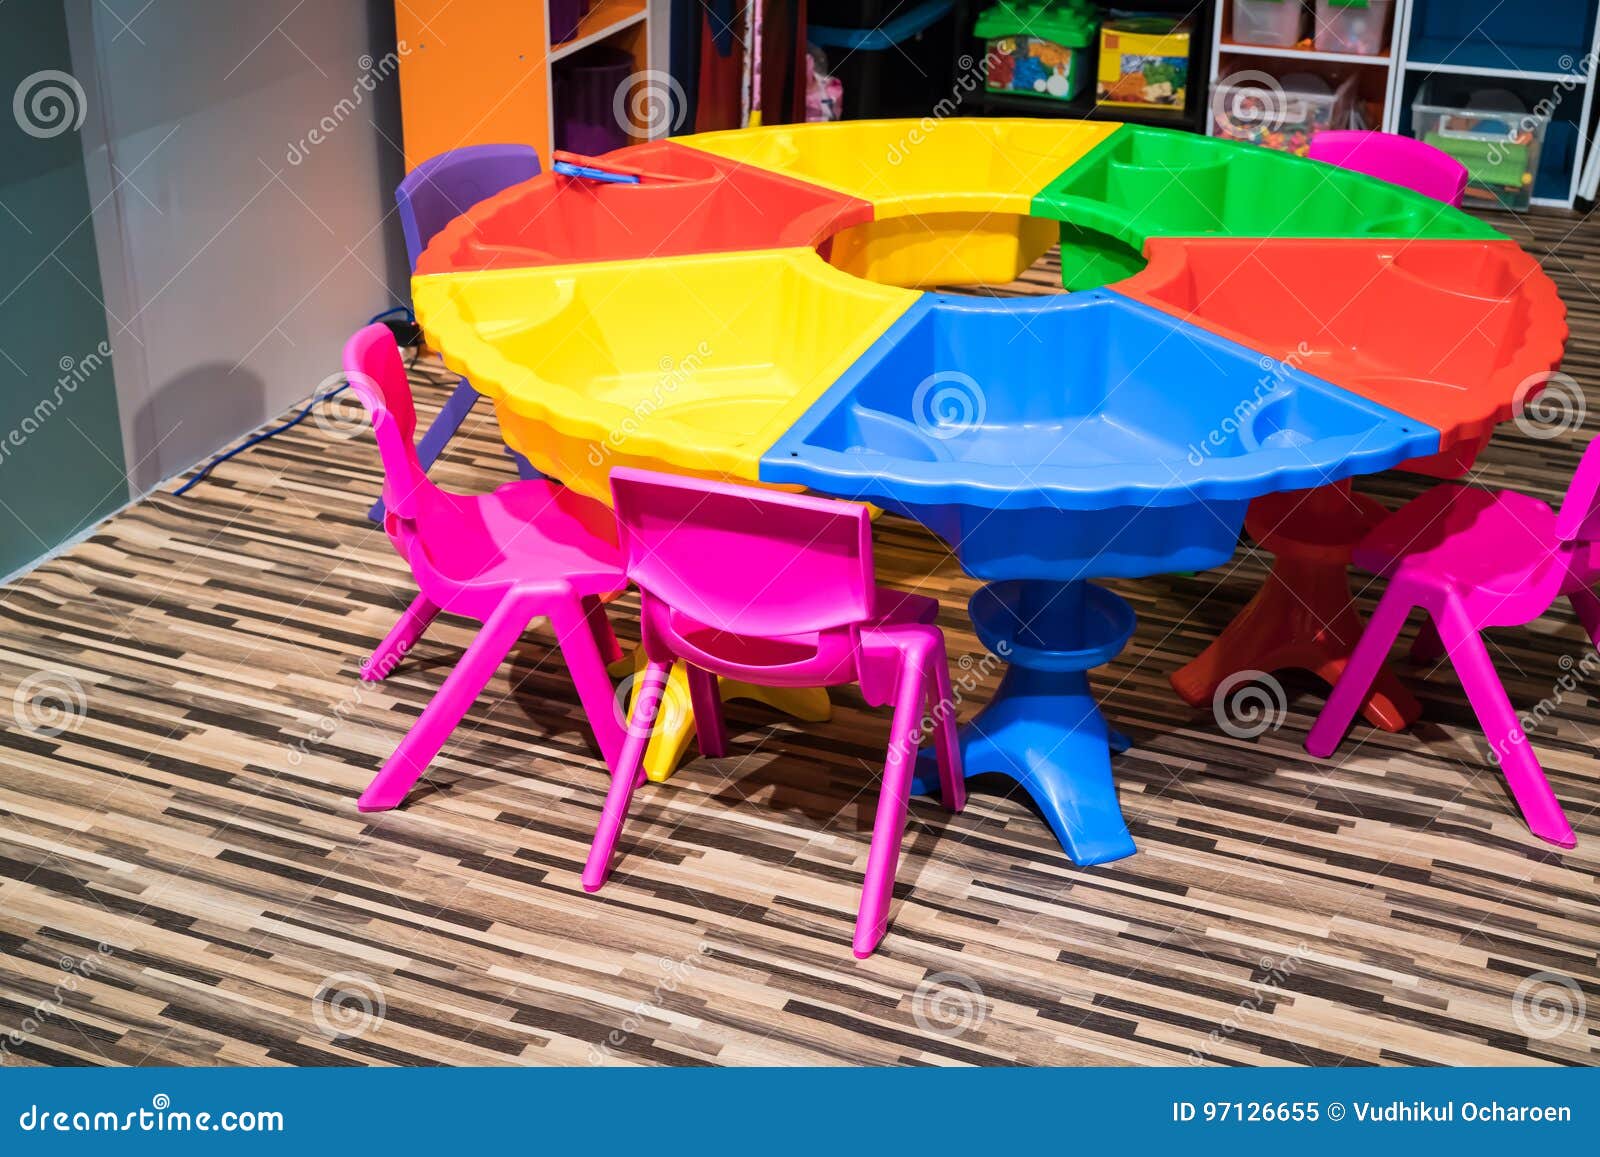 Colorful Round Plastic Table With Sand Pit And Chair On Pattern